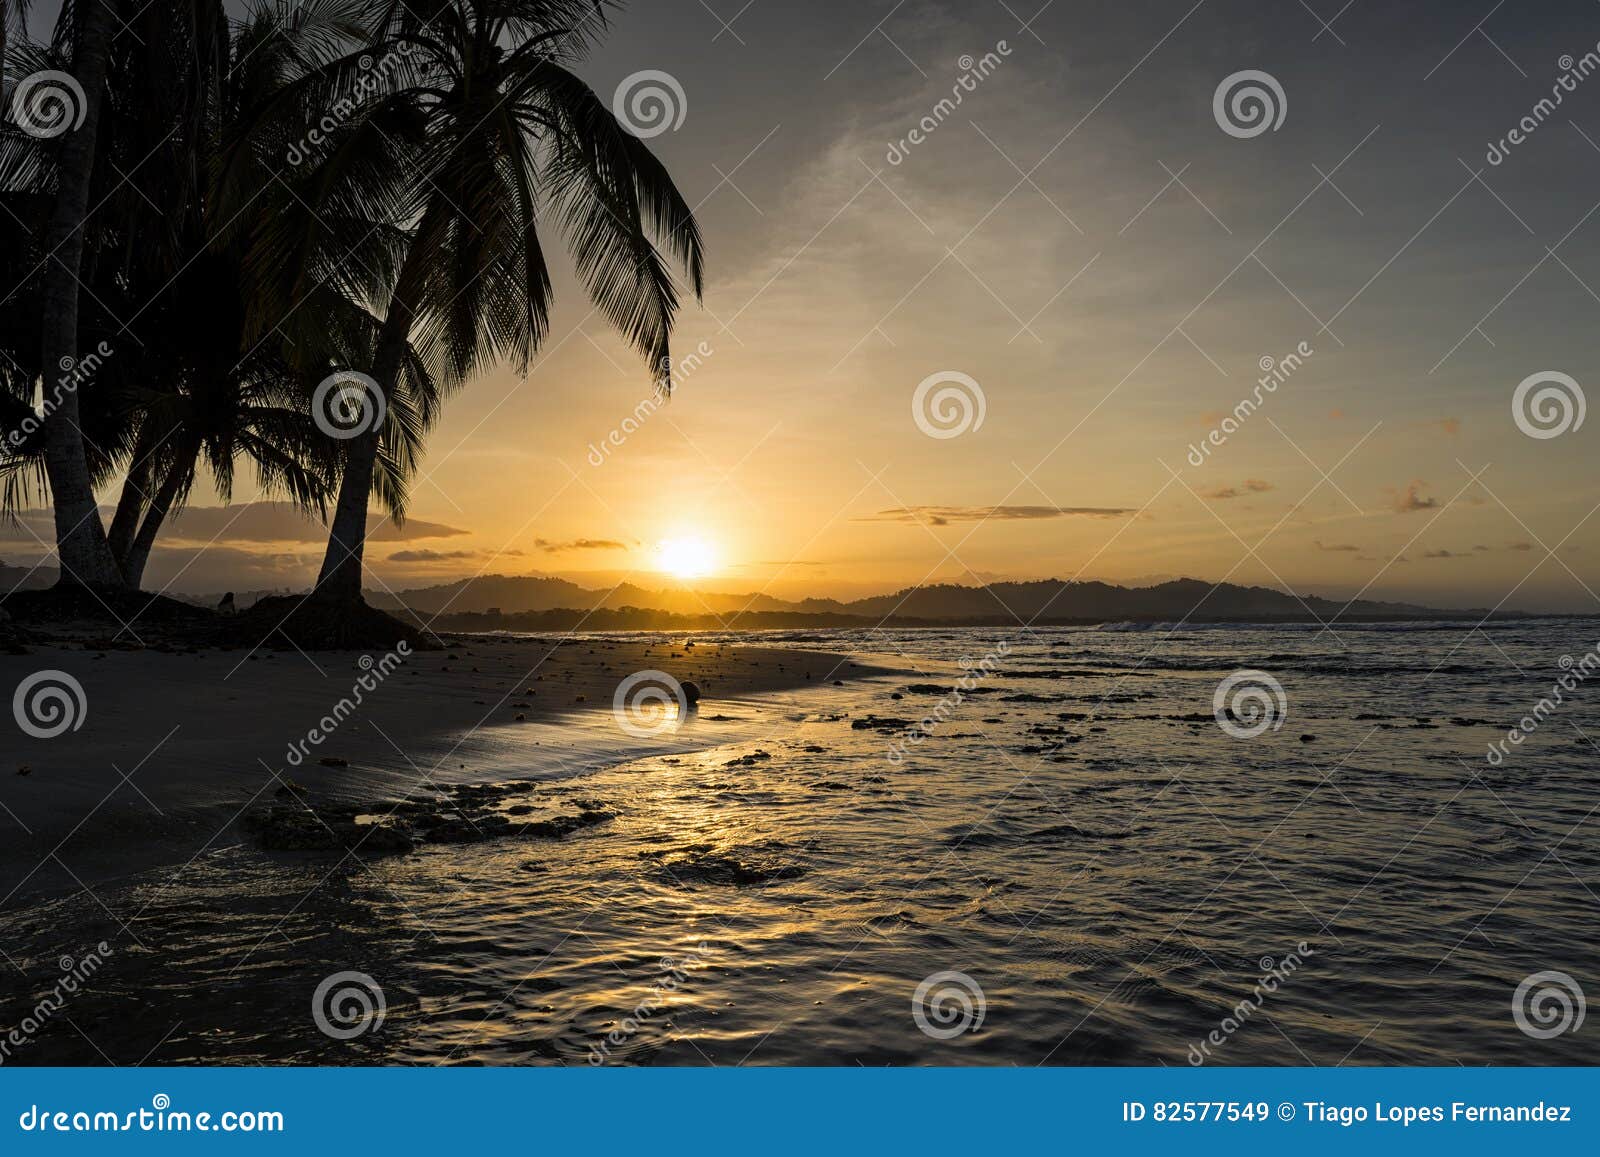 view of a beach with palm trees at sunset in puerto viejo de talamanca, costa rica